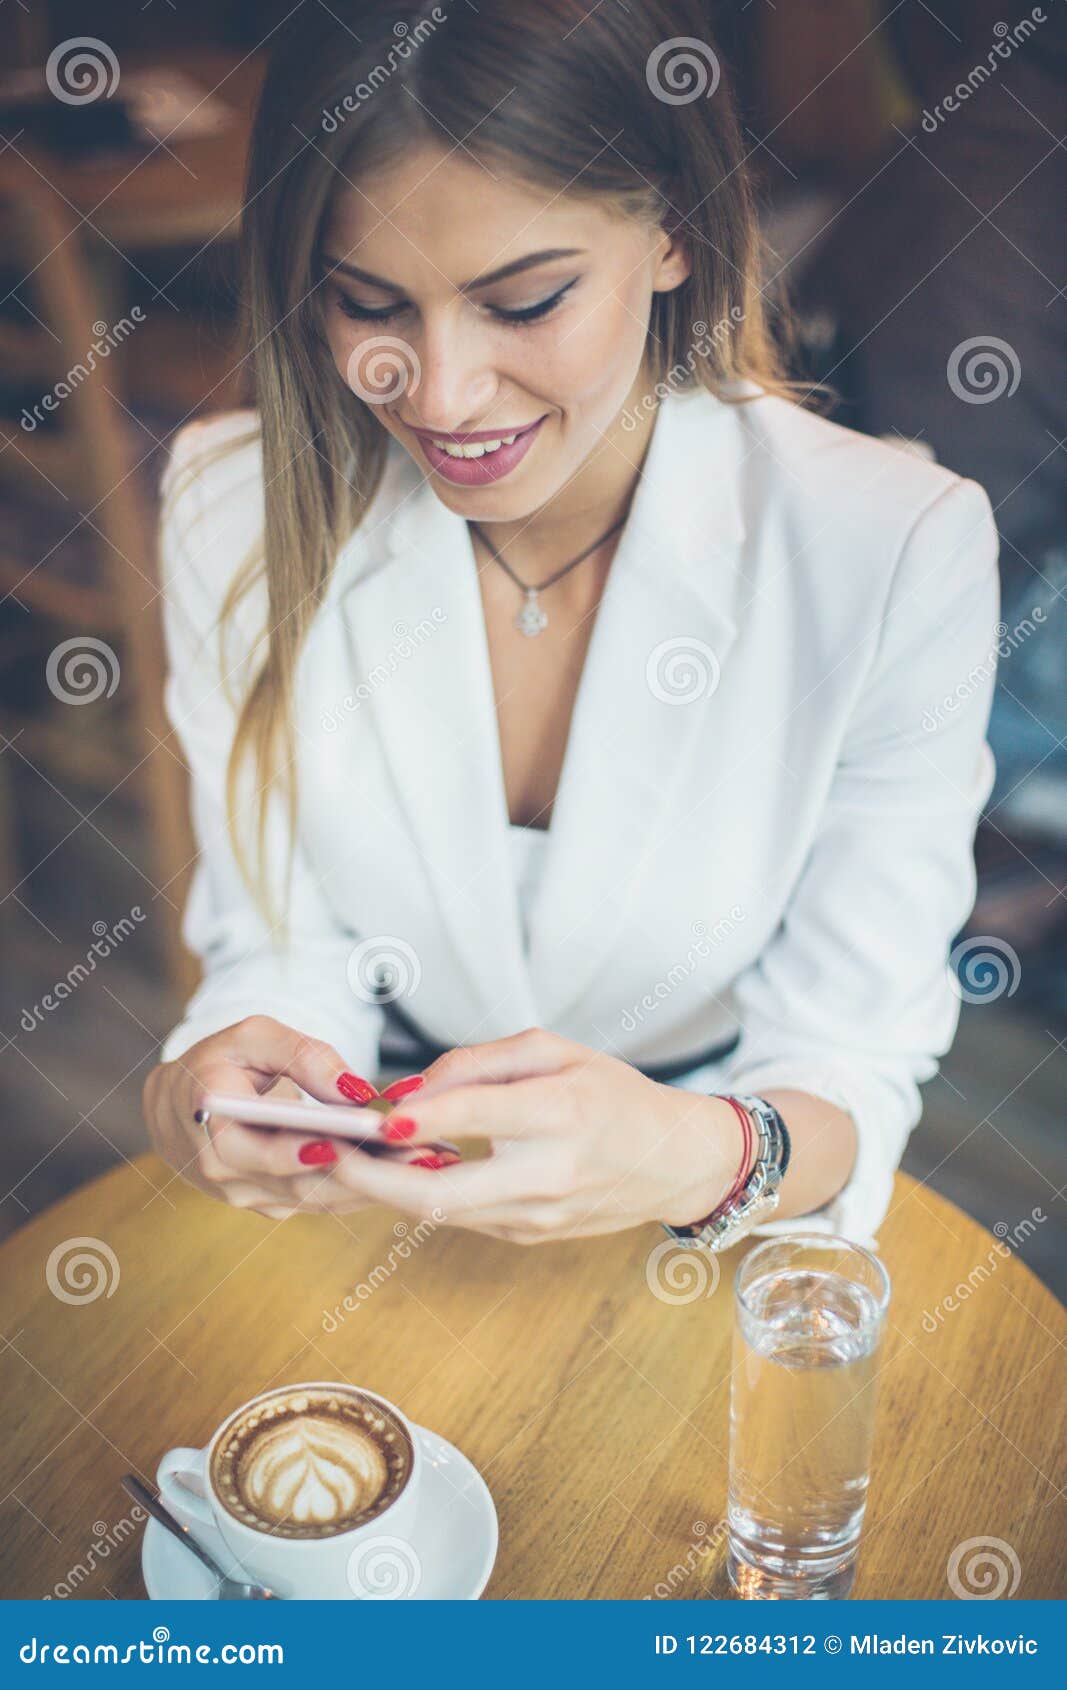 Expressions Content Girl stock image. Image of playful 